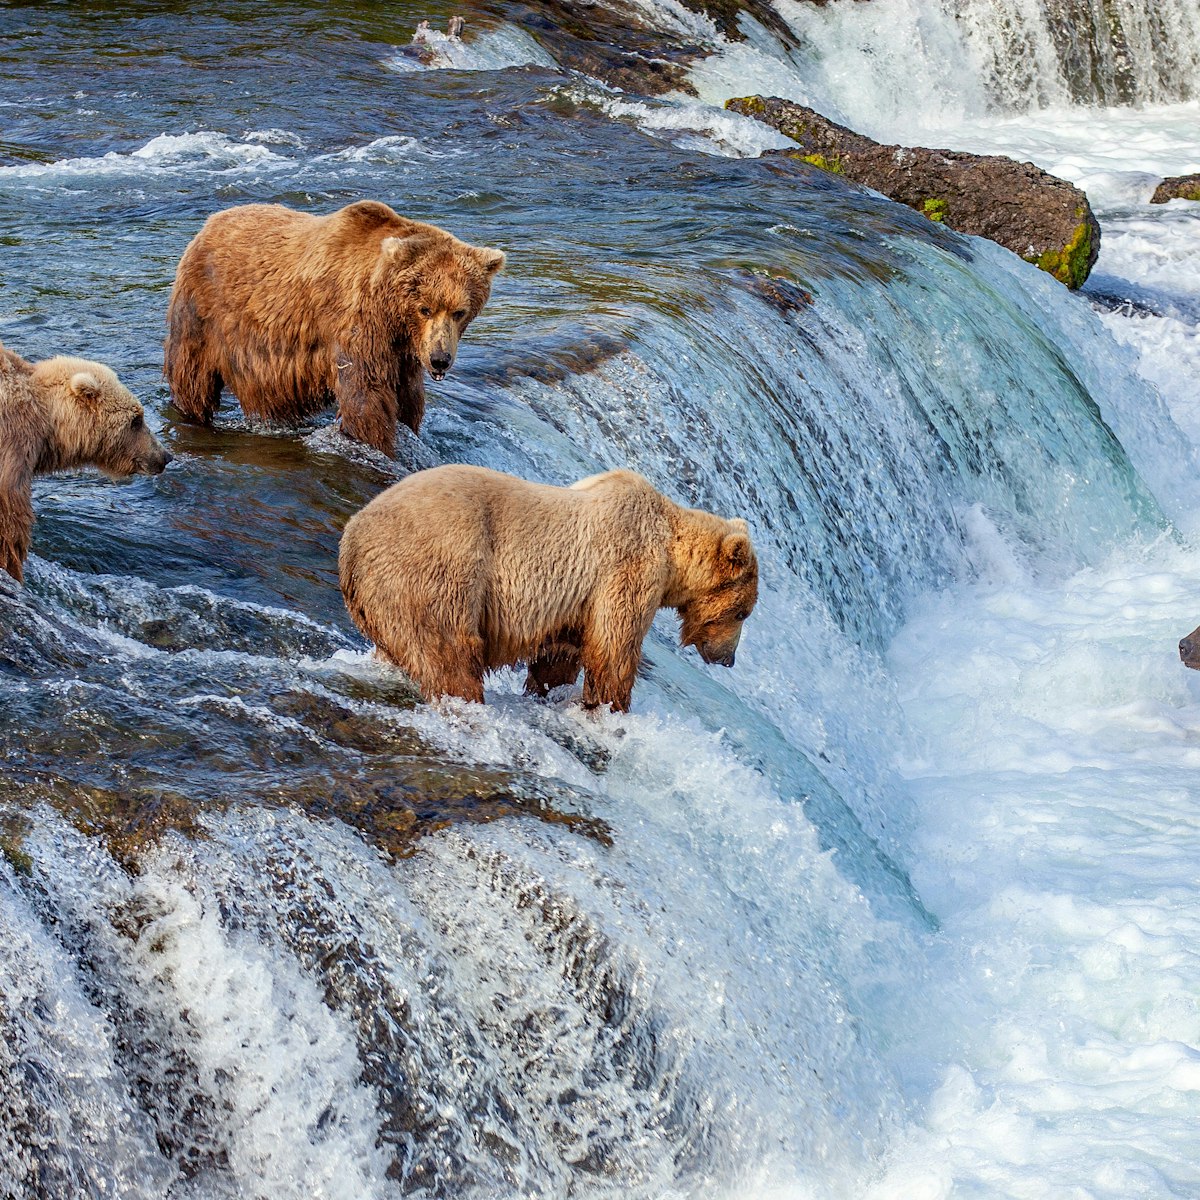 A group of grizzly bears fishing for salmon at Brooks Falls in Katmai National Park.